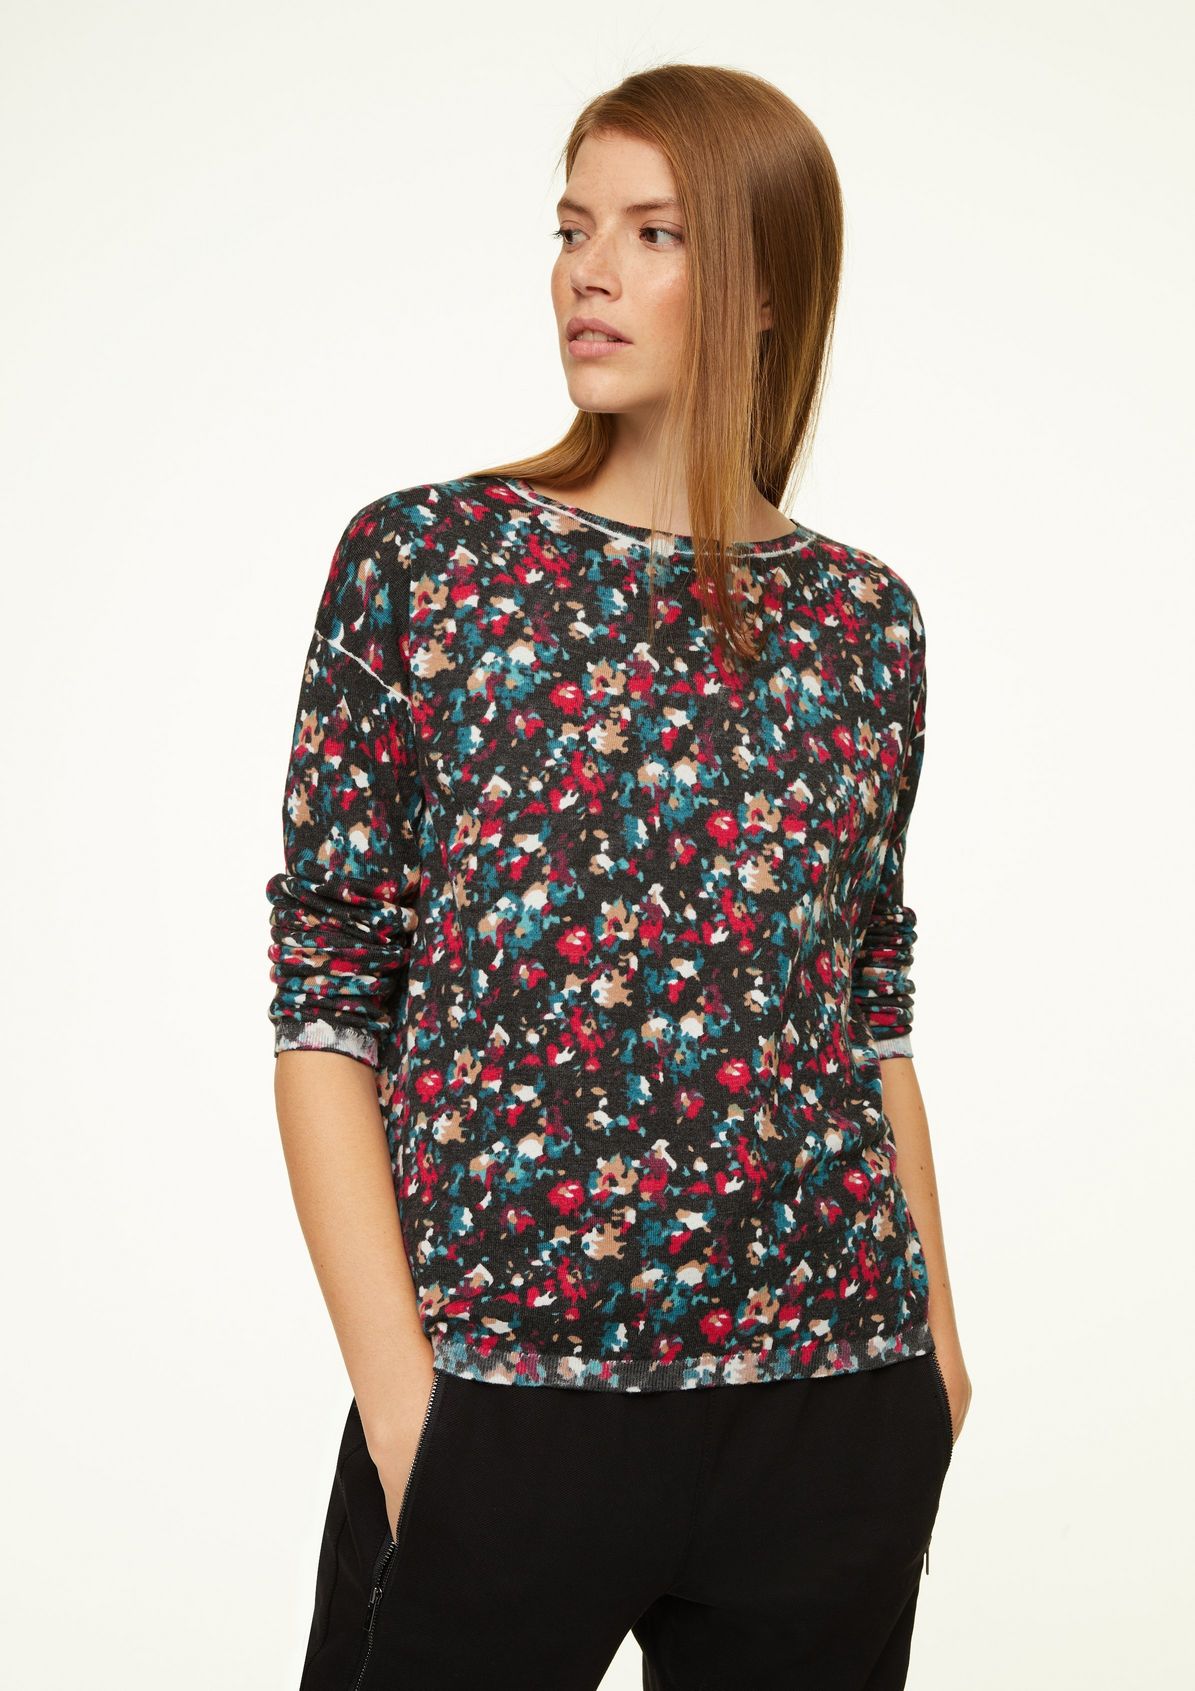 Fine knit jumper with inside-out print from comma